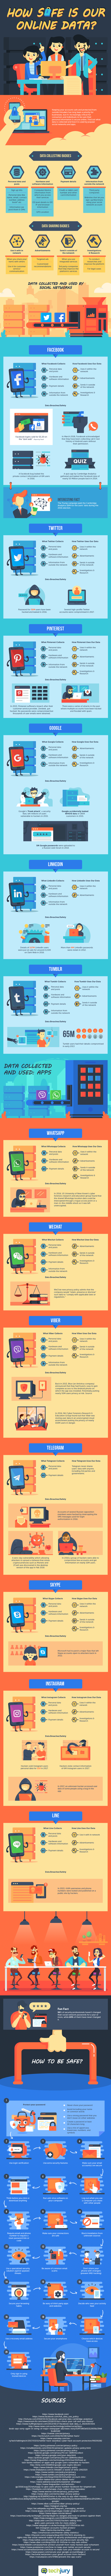 FINAL infographic how safe online data